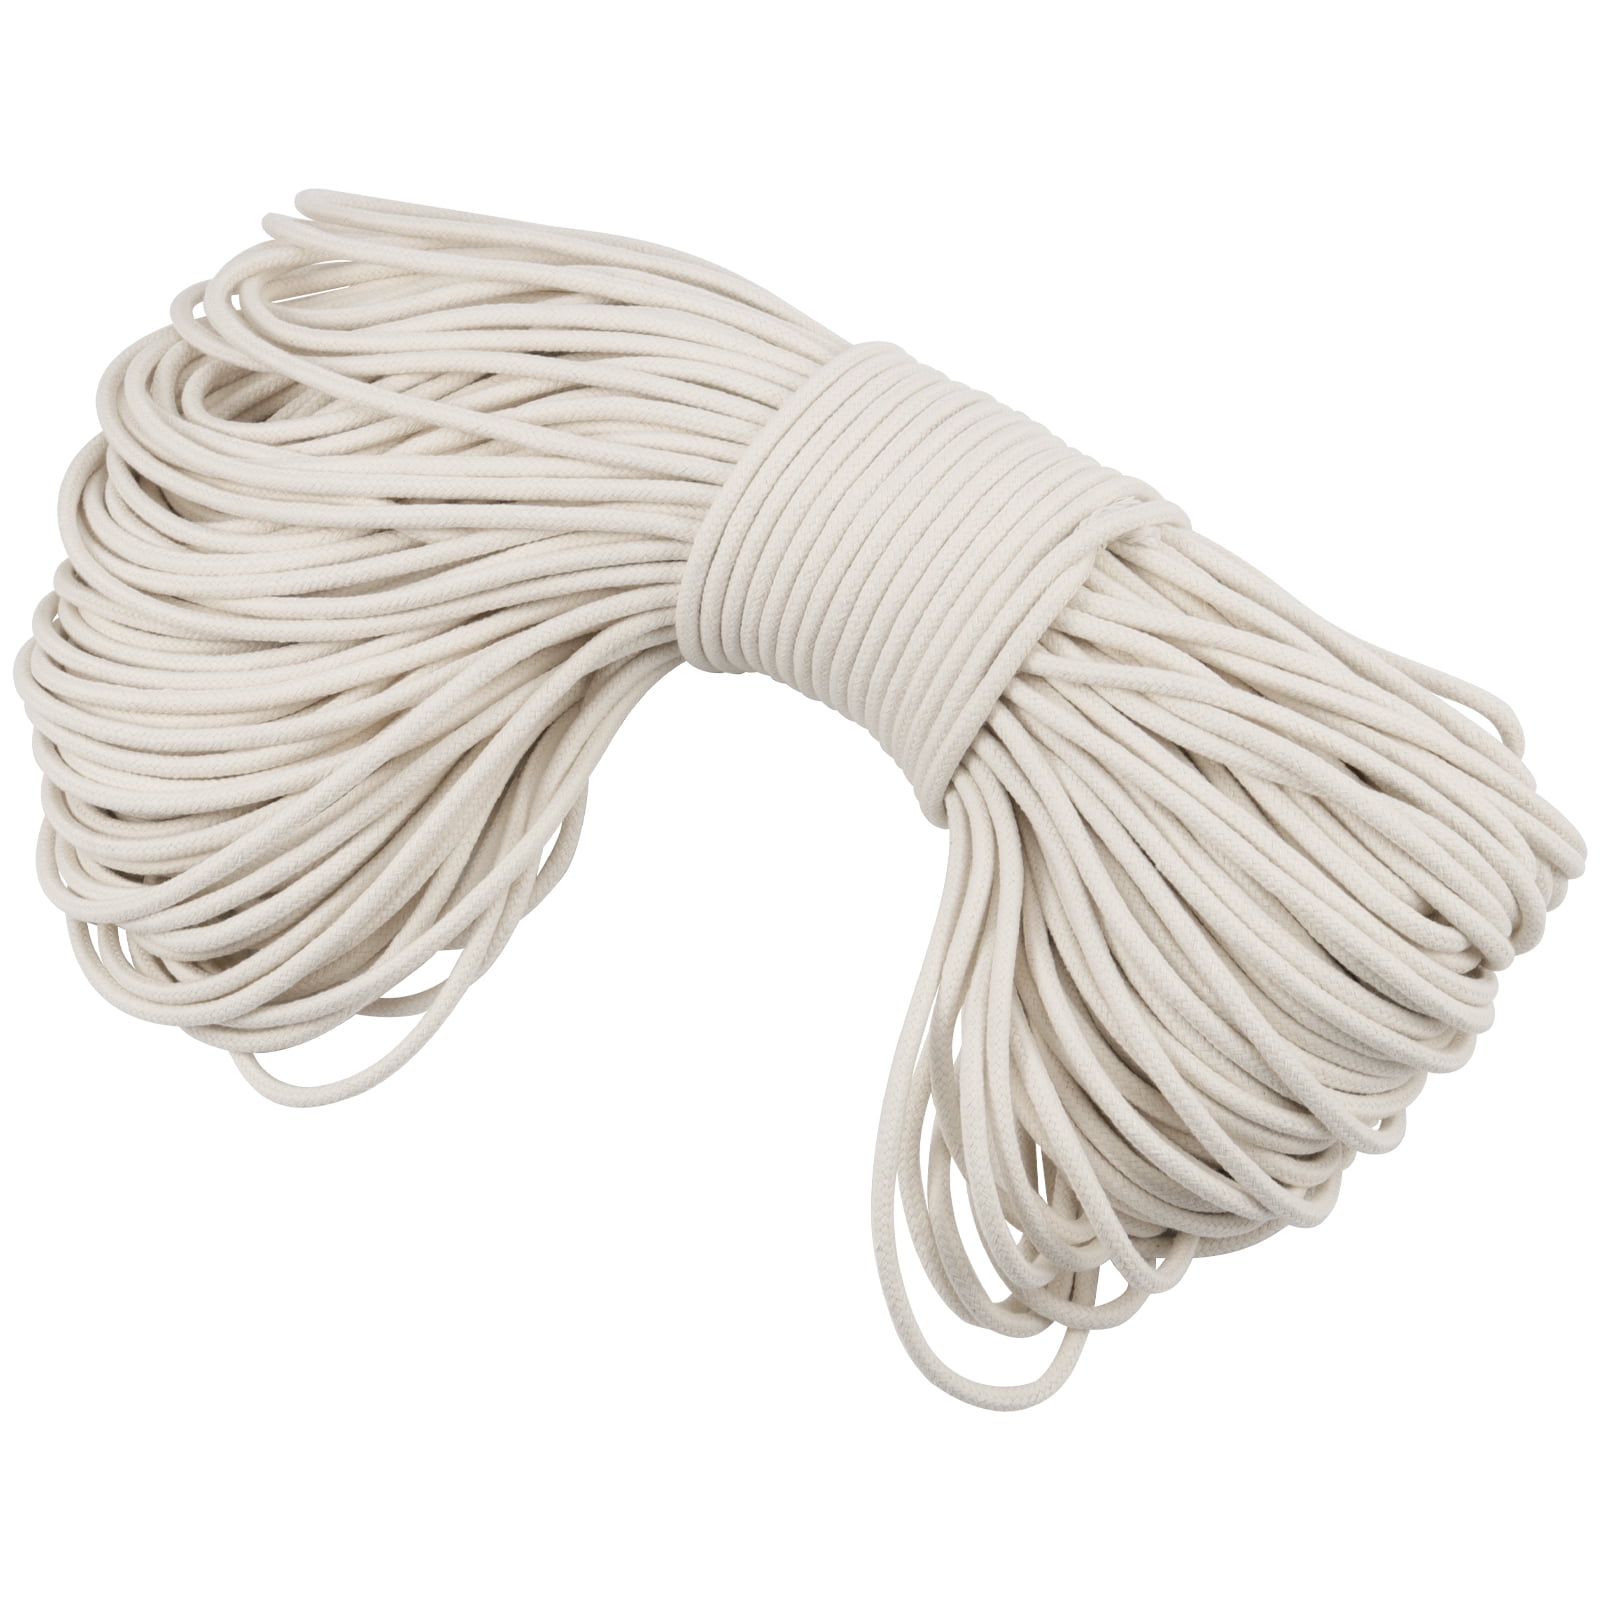 1/4 Inch Natural Cotton Rope, White Craft Rope Clothesline, Used for DIY  Rope Baskets, Handicrafts, Candle Wicks, etc, 6MM, 39 Feet.